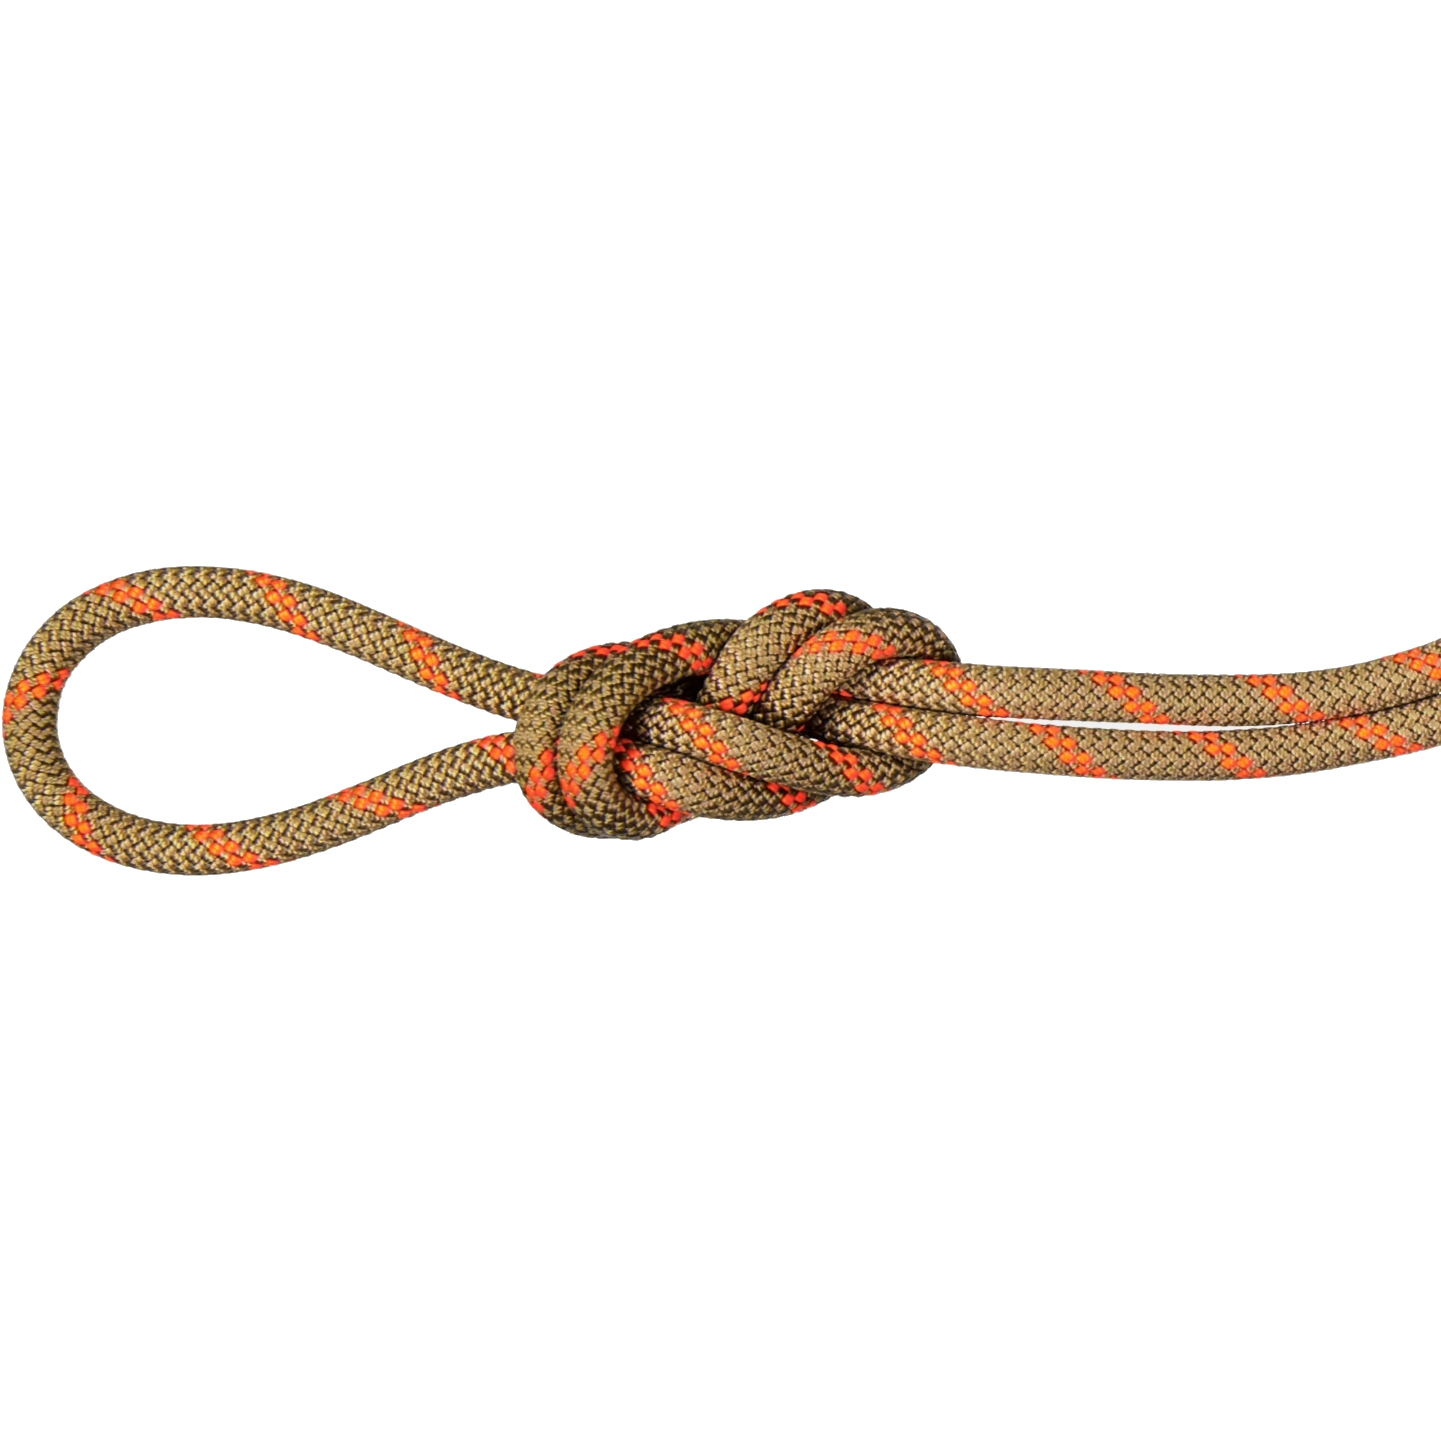 Picture of Mammut 8.0 Alpine Dry Rope - 60m - boa-safety orange